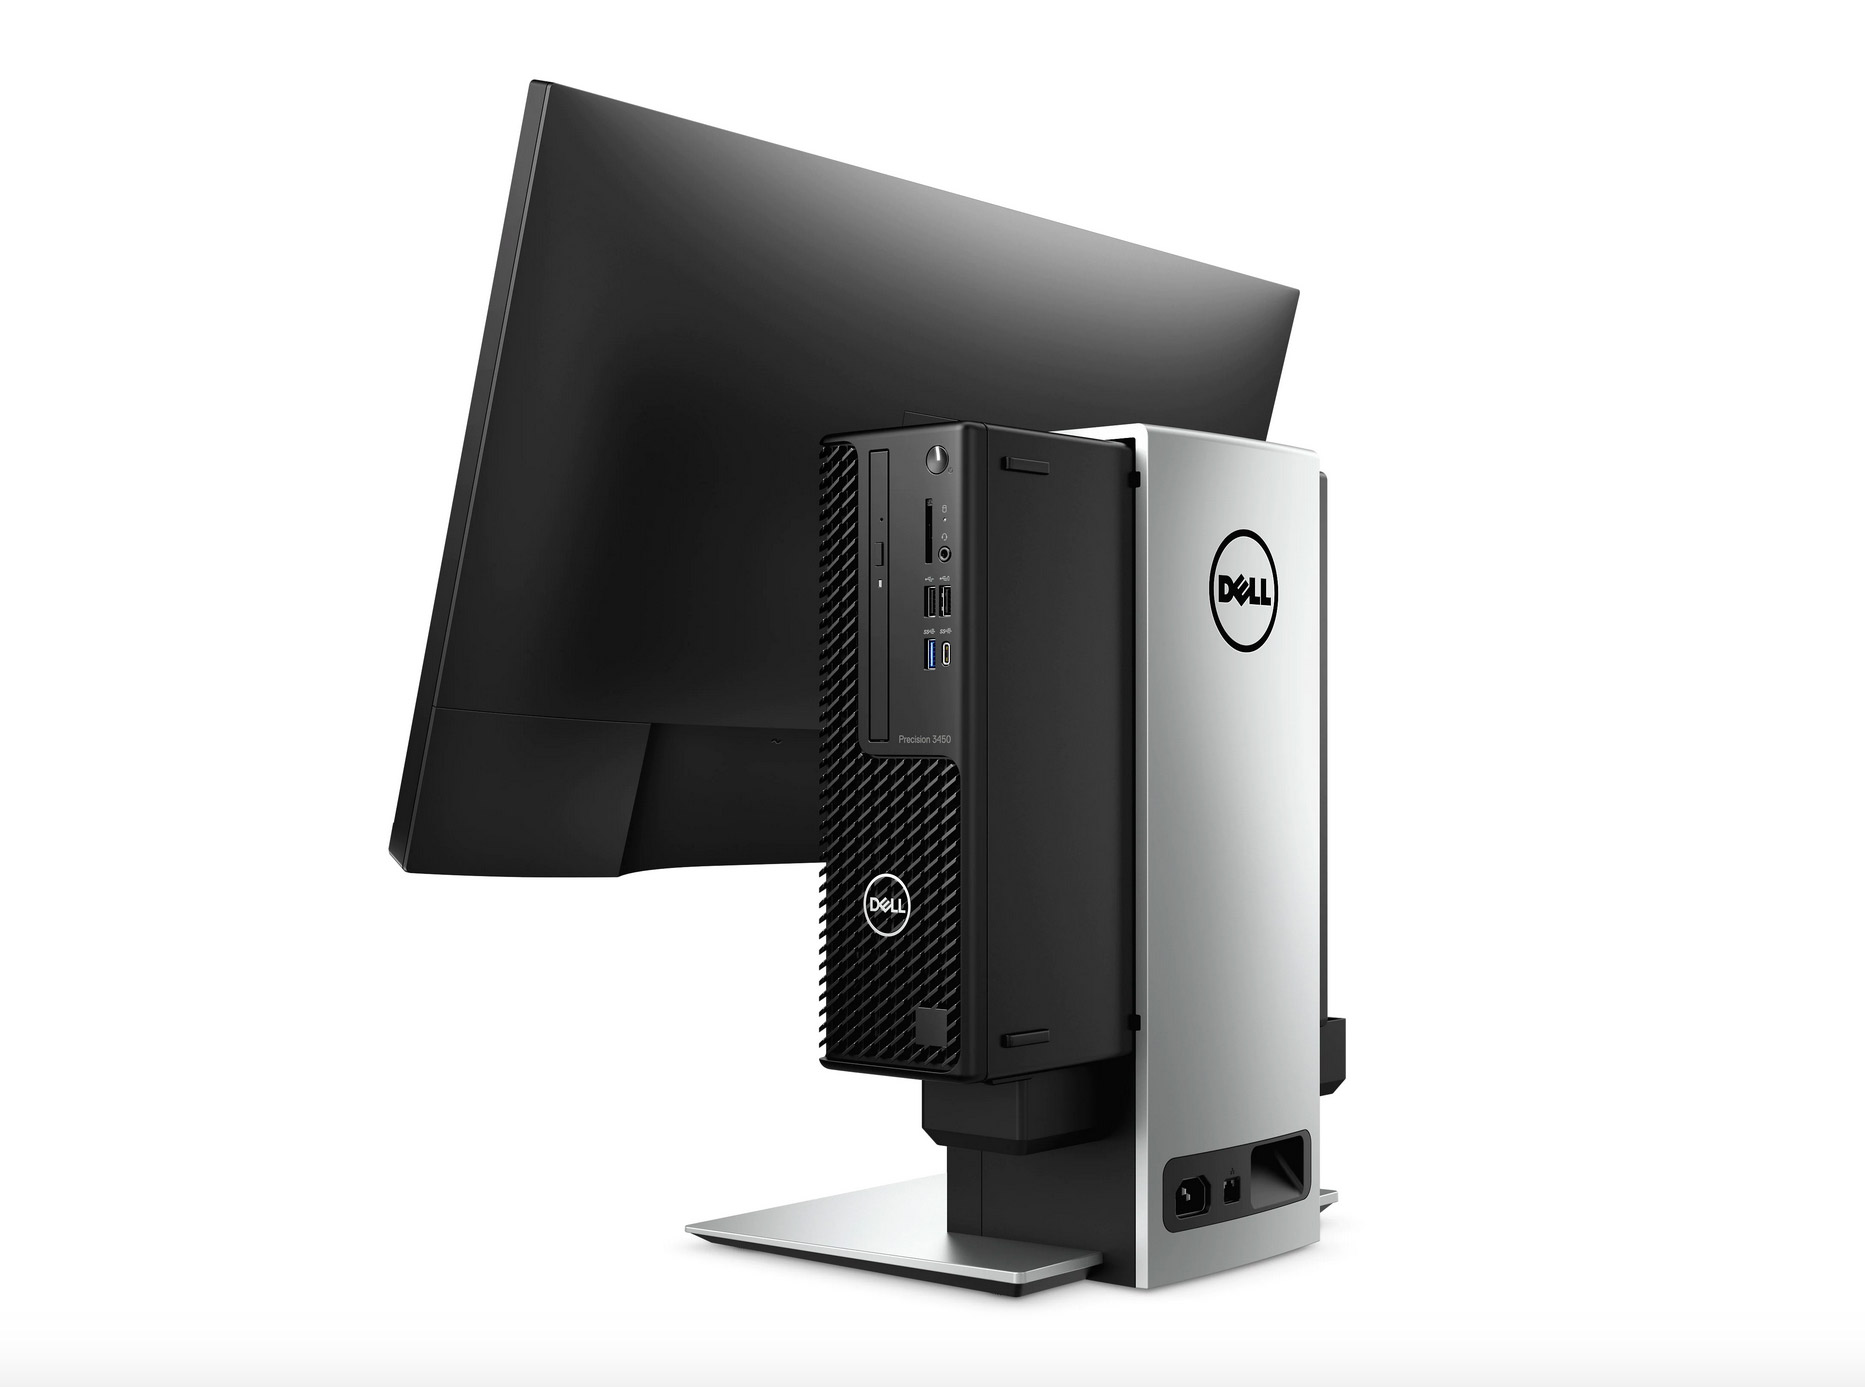 The Dell Precision 3450 mounted on a display